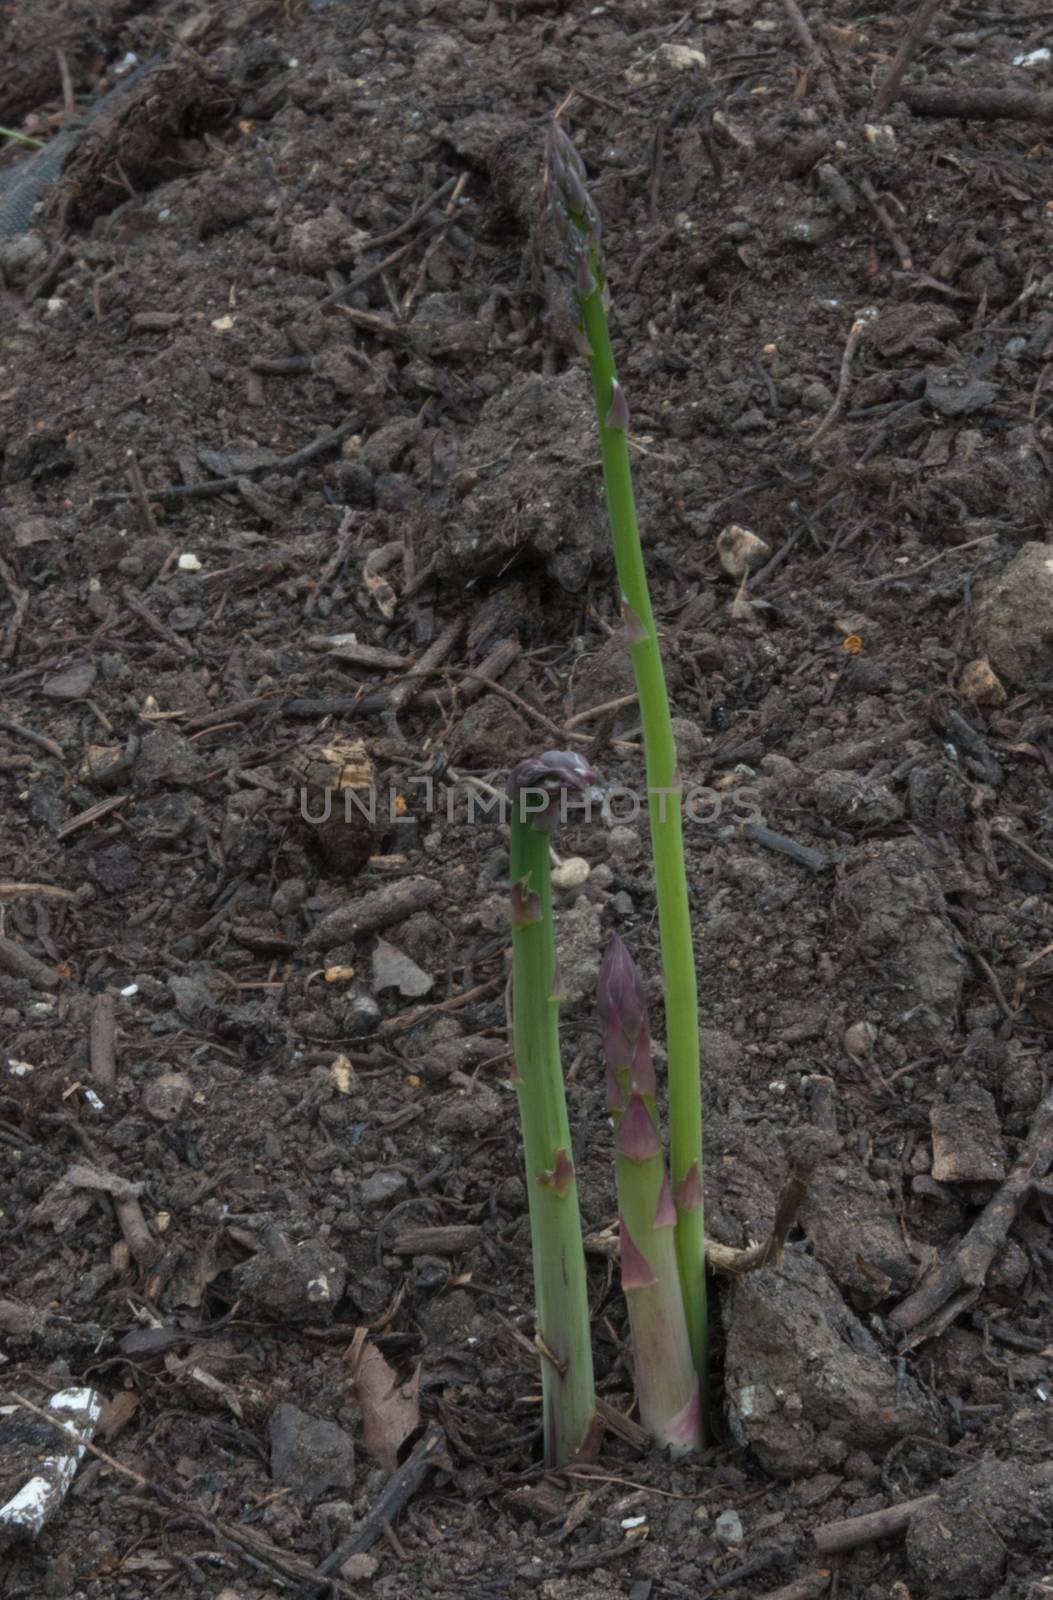 Asparagus Spears Growing in a Vegetable Garden